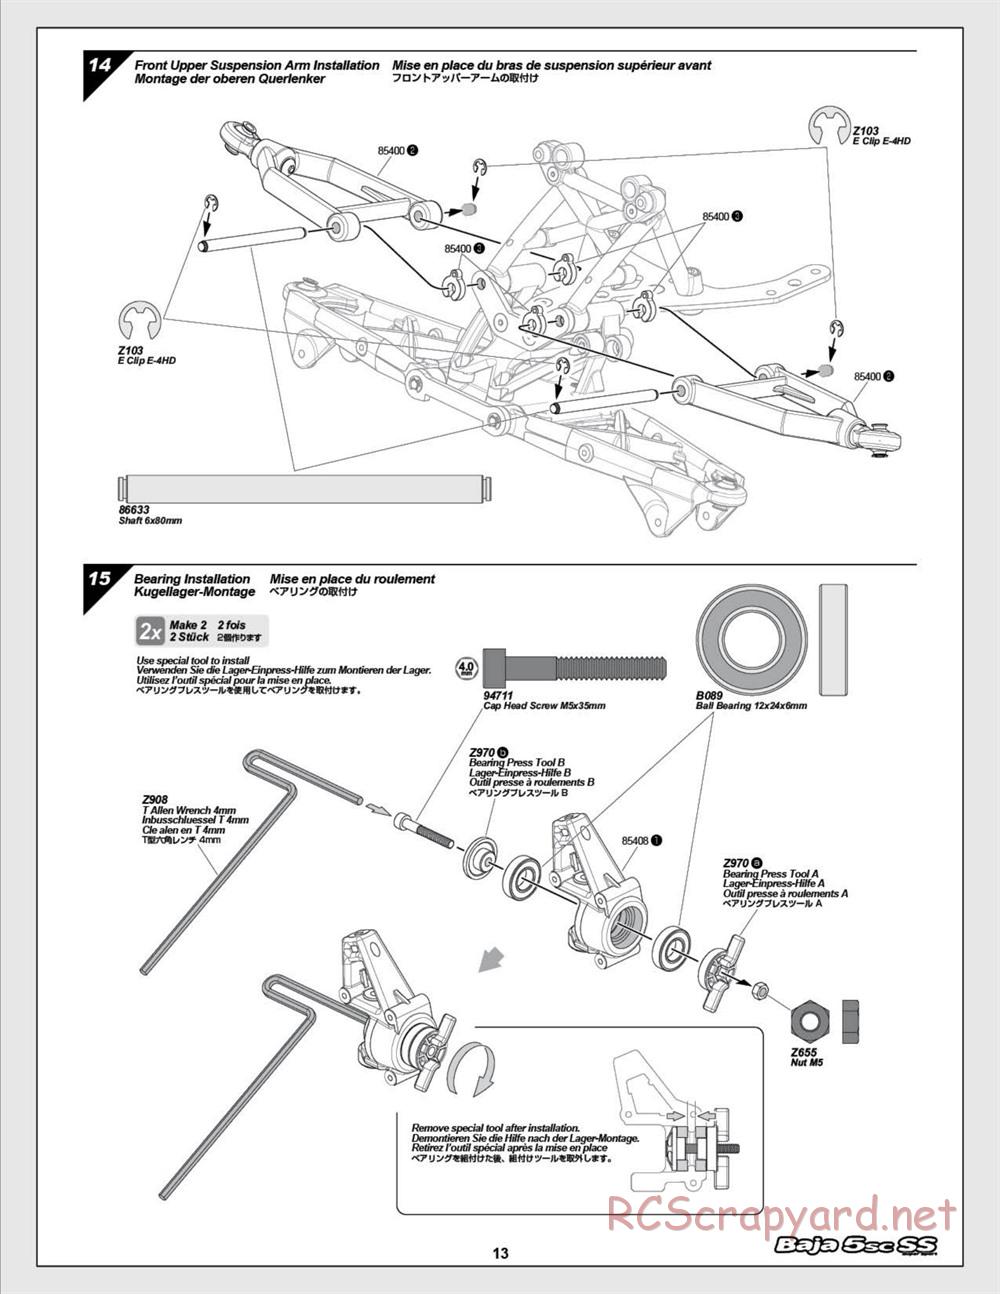 HPI - Baja 5SC SS - Exploded View - Page 13